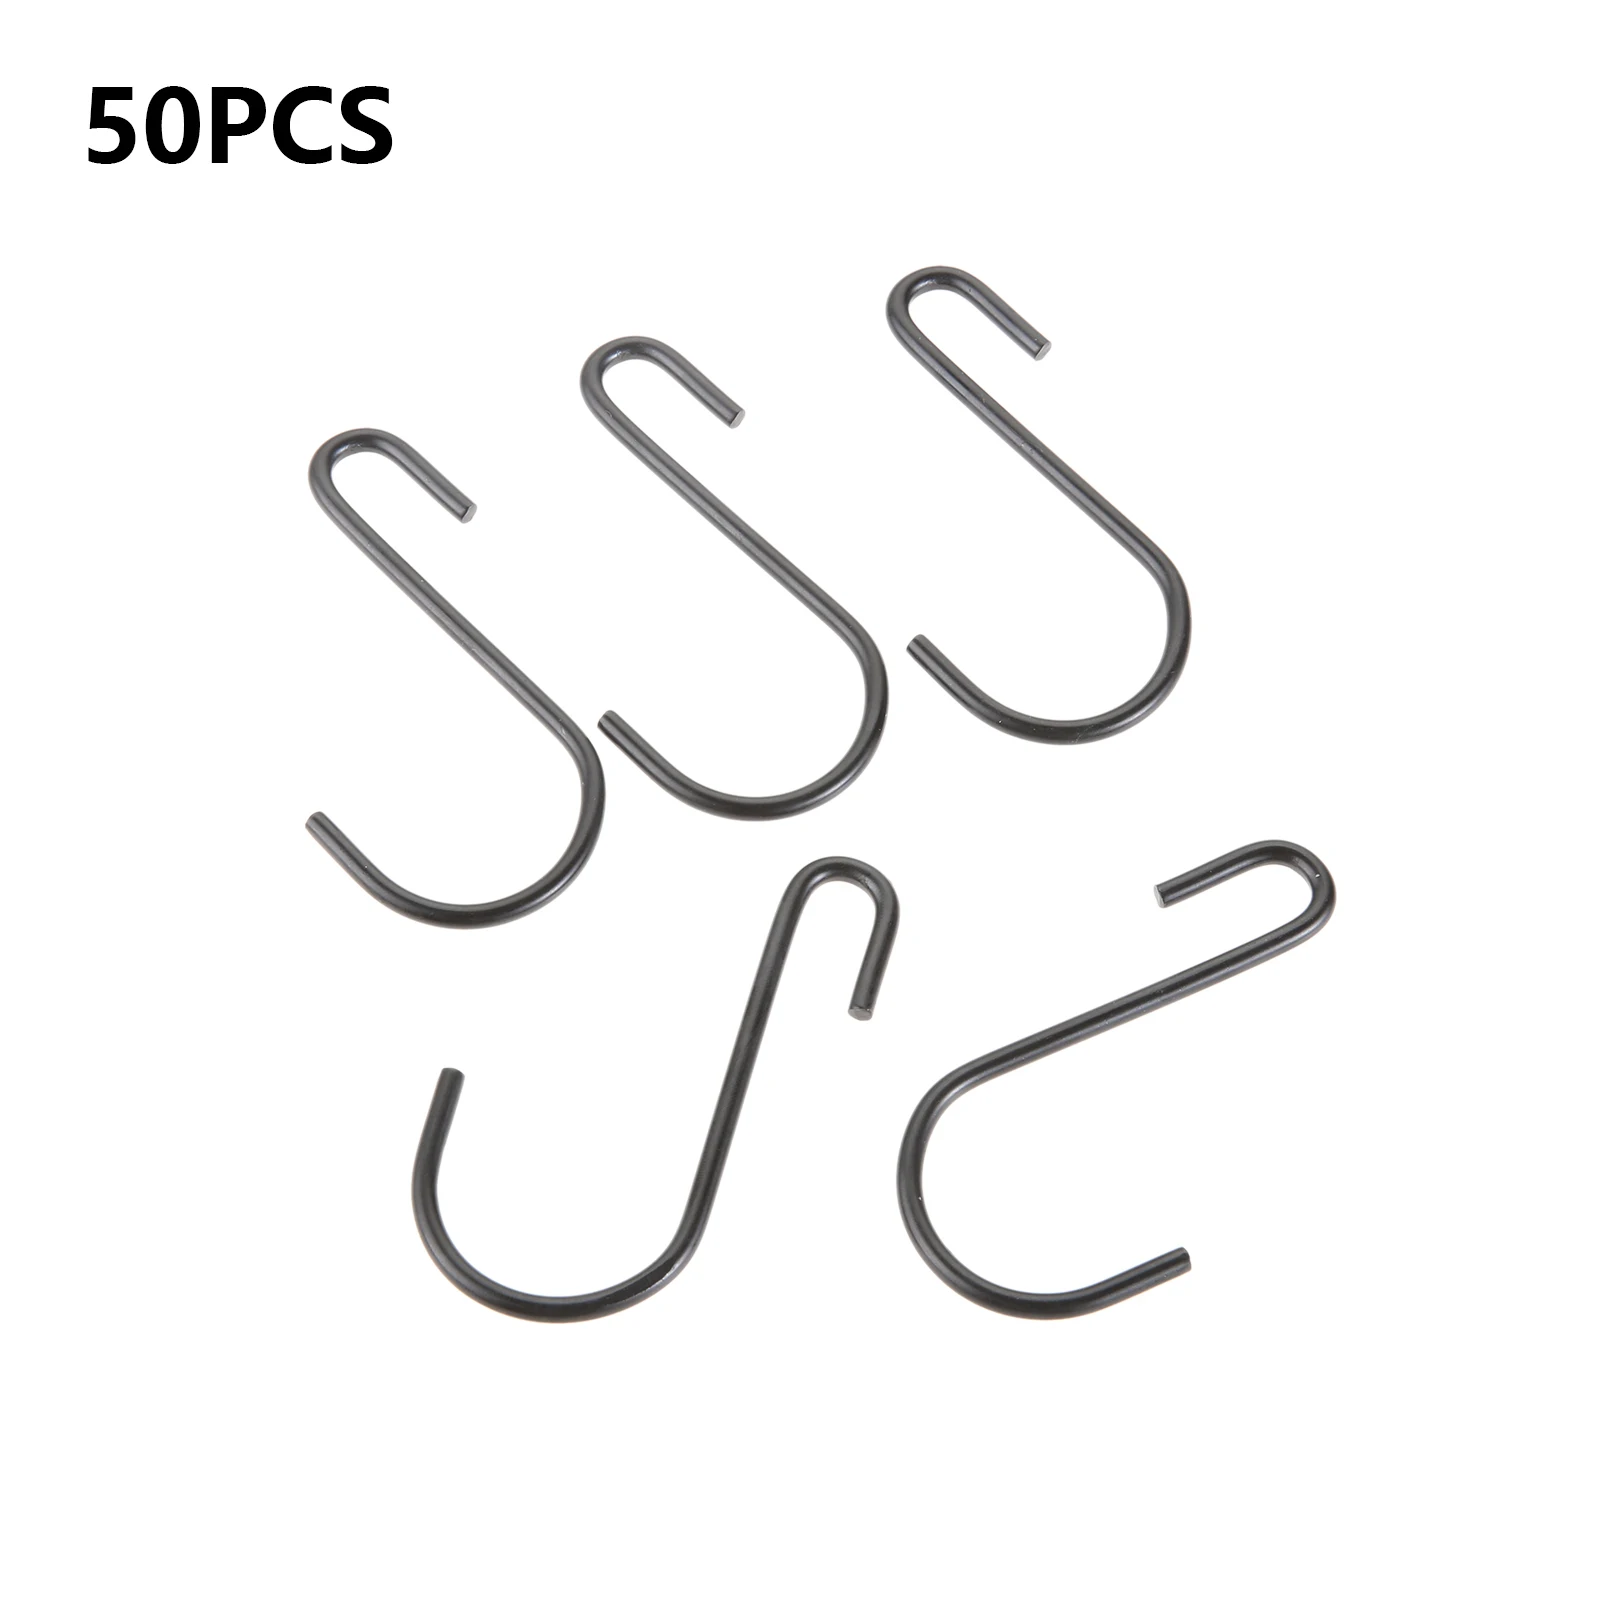 

5pcs Black S-shaped Hanging Hooks for Kitchenware Spoons Pans Pots Coffee Mugs Utensils Towels Plants Gardening Tools Bags